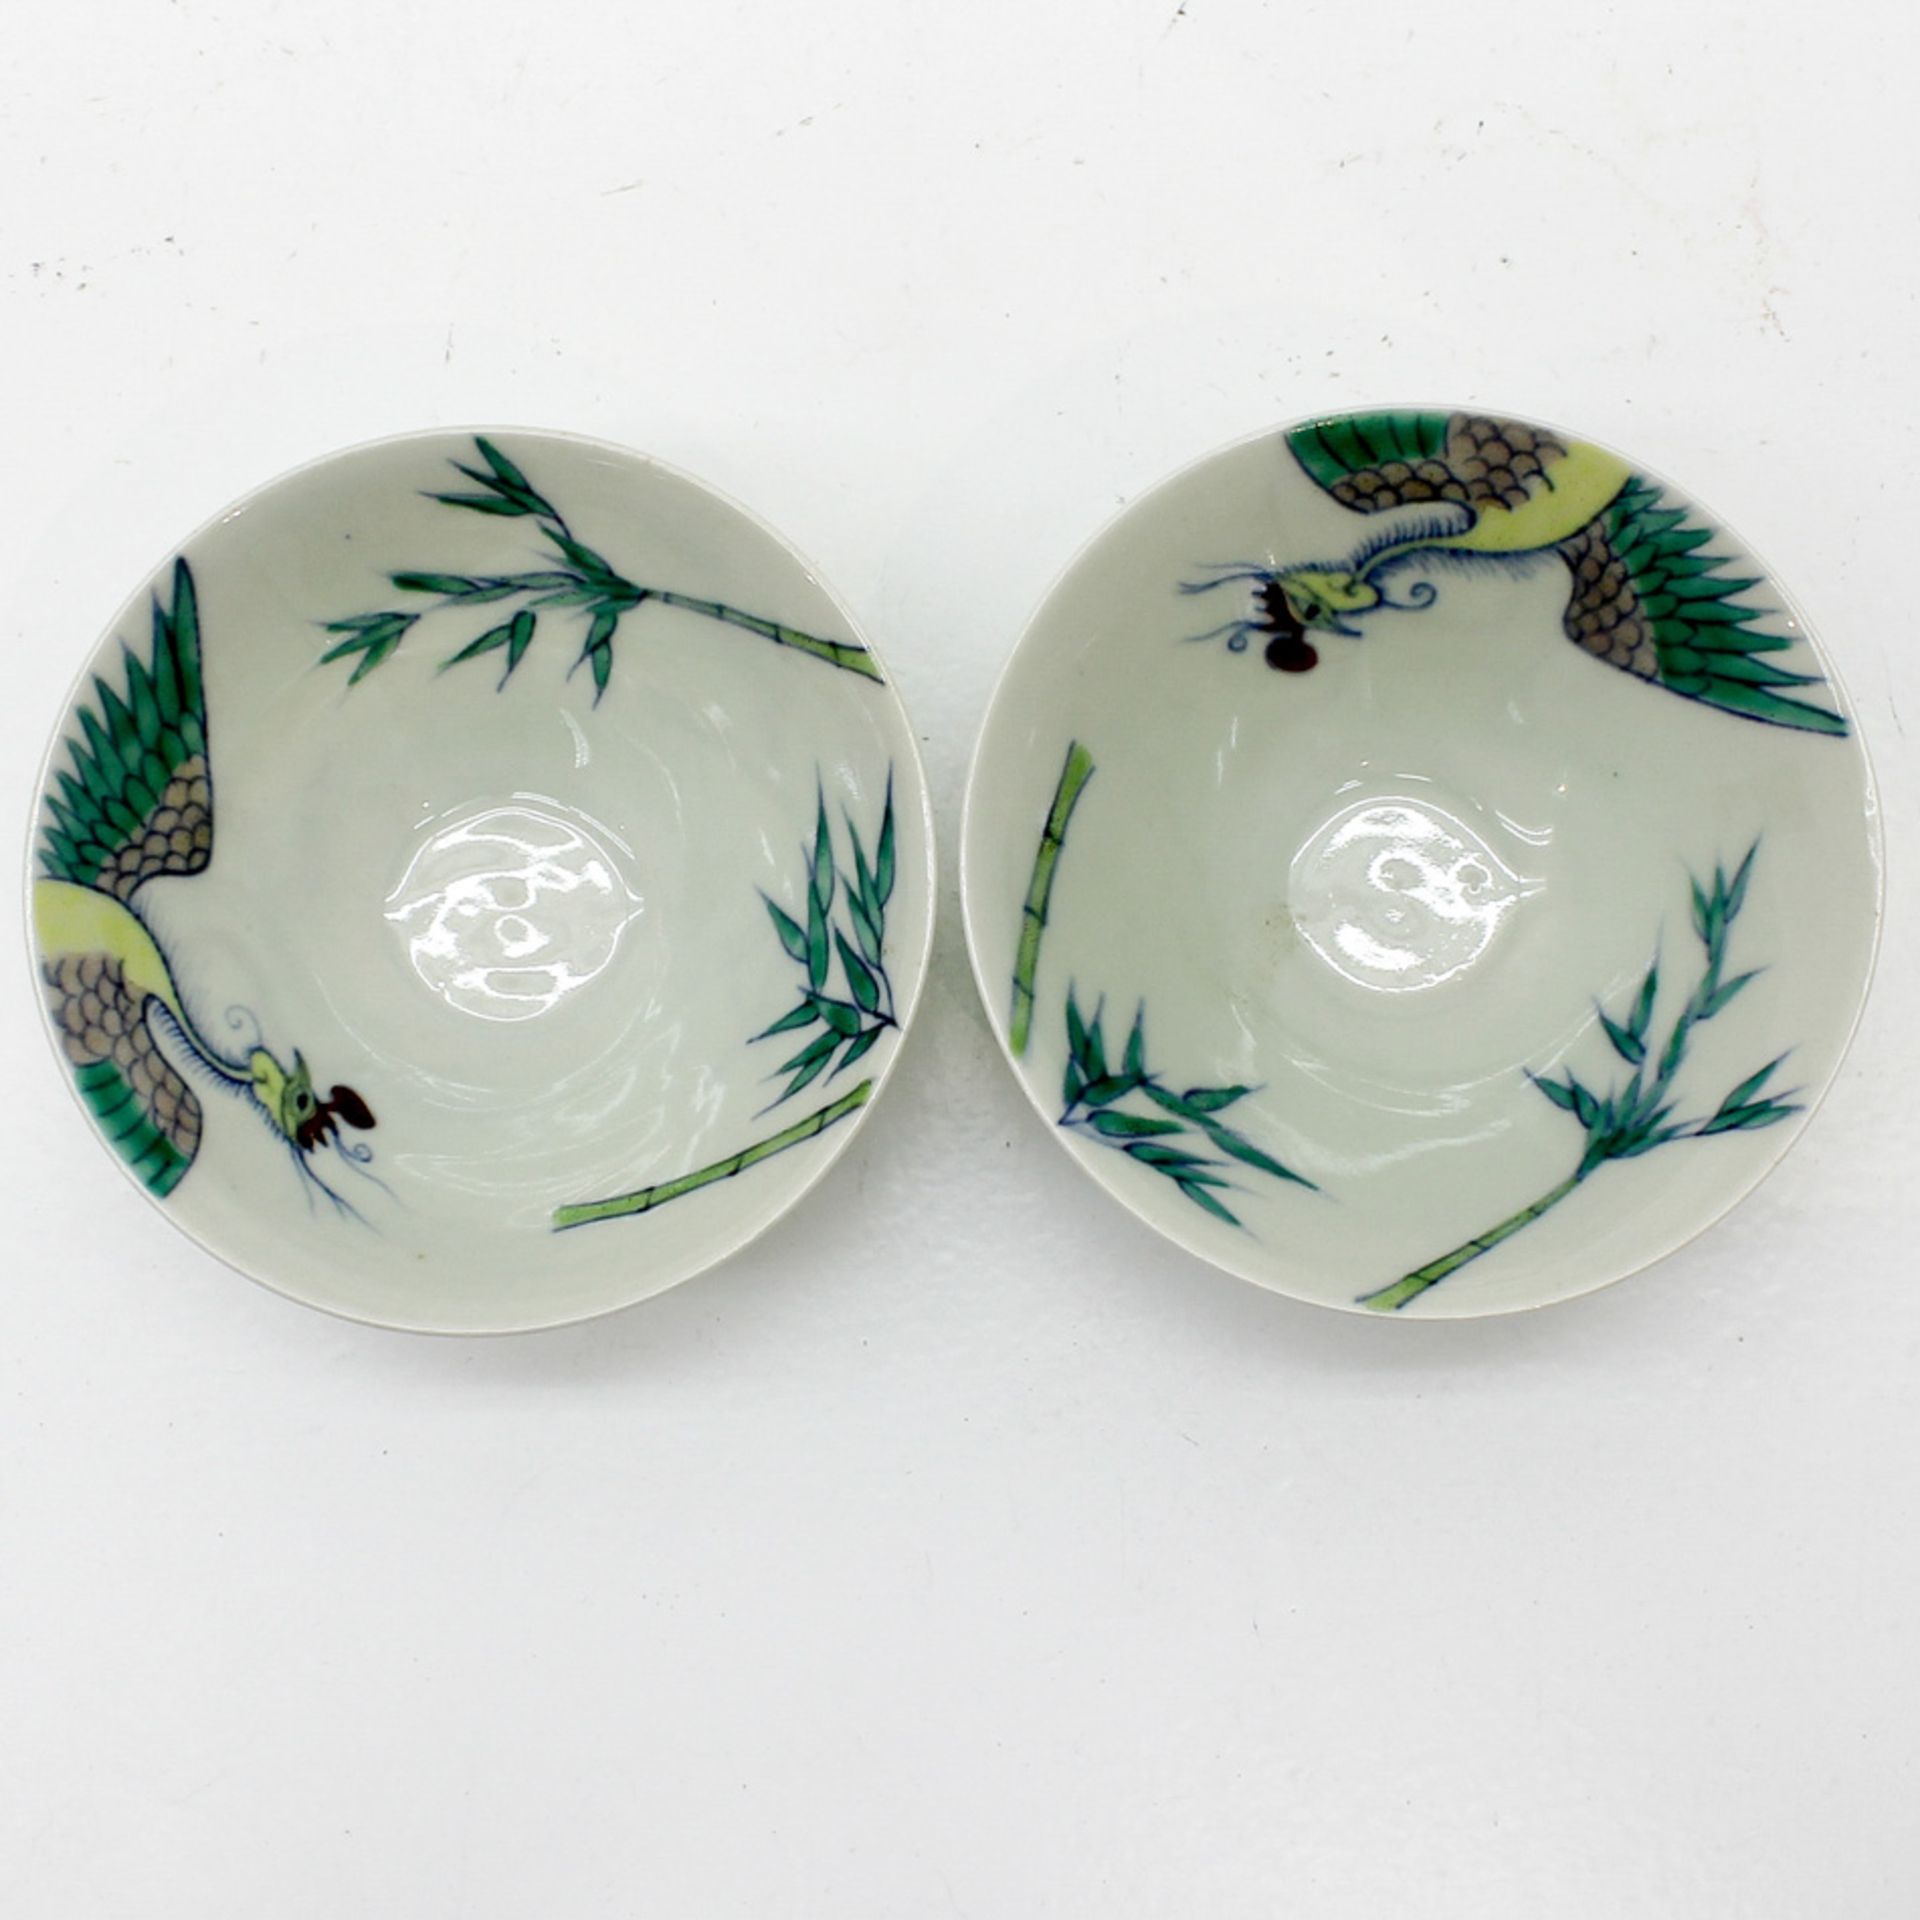 Lot of 2 China Porcelain Small Bowls In bamboo decor, marked with 6 Chinese characters on bottom, - Bild 2 aus 3